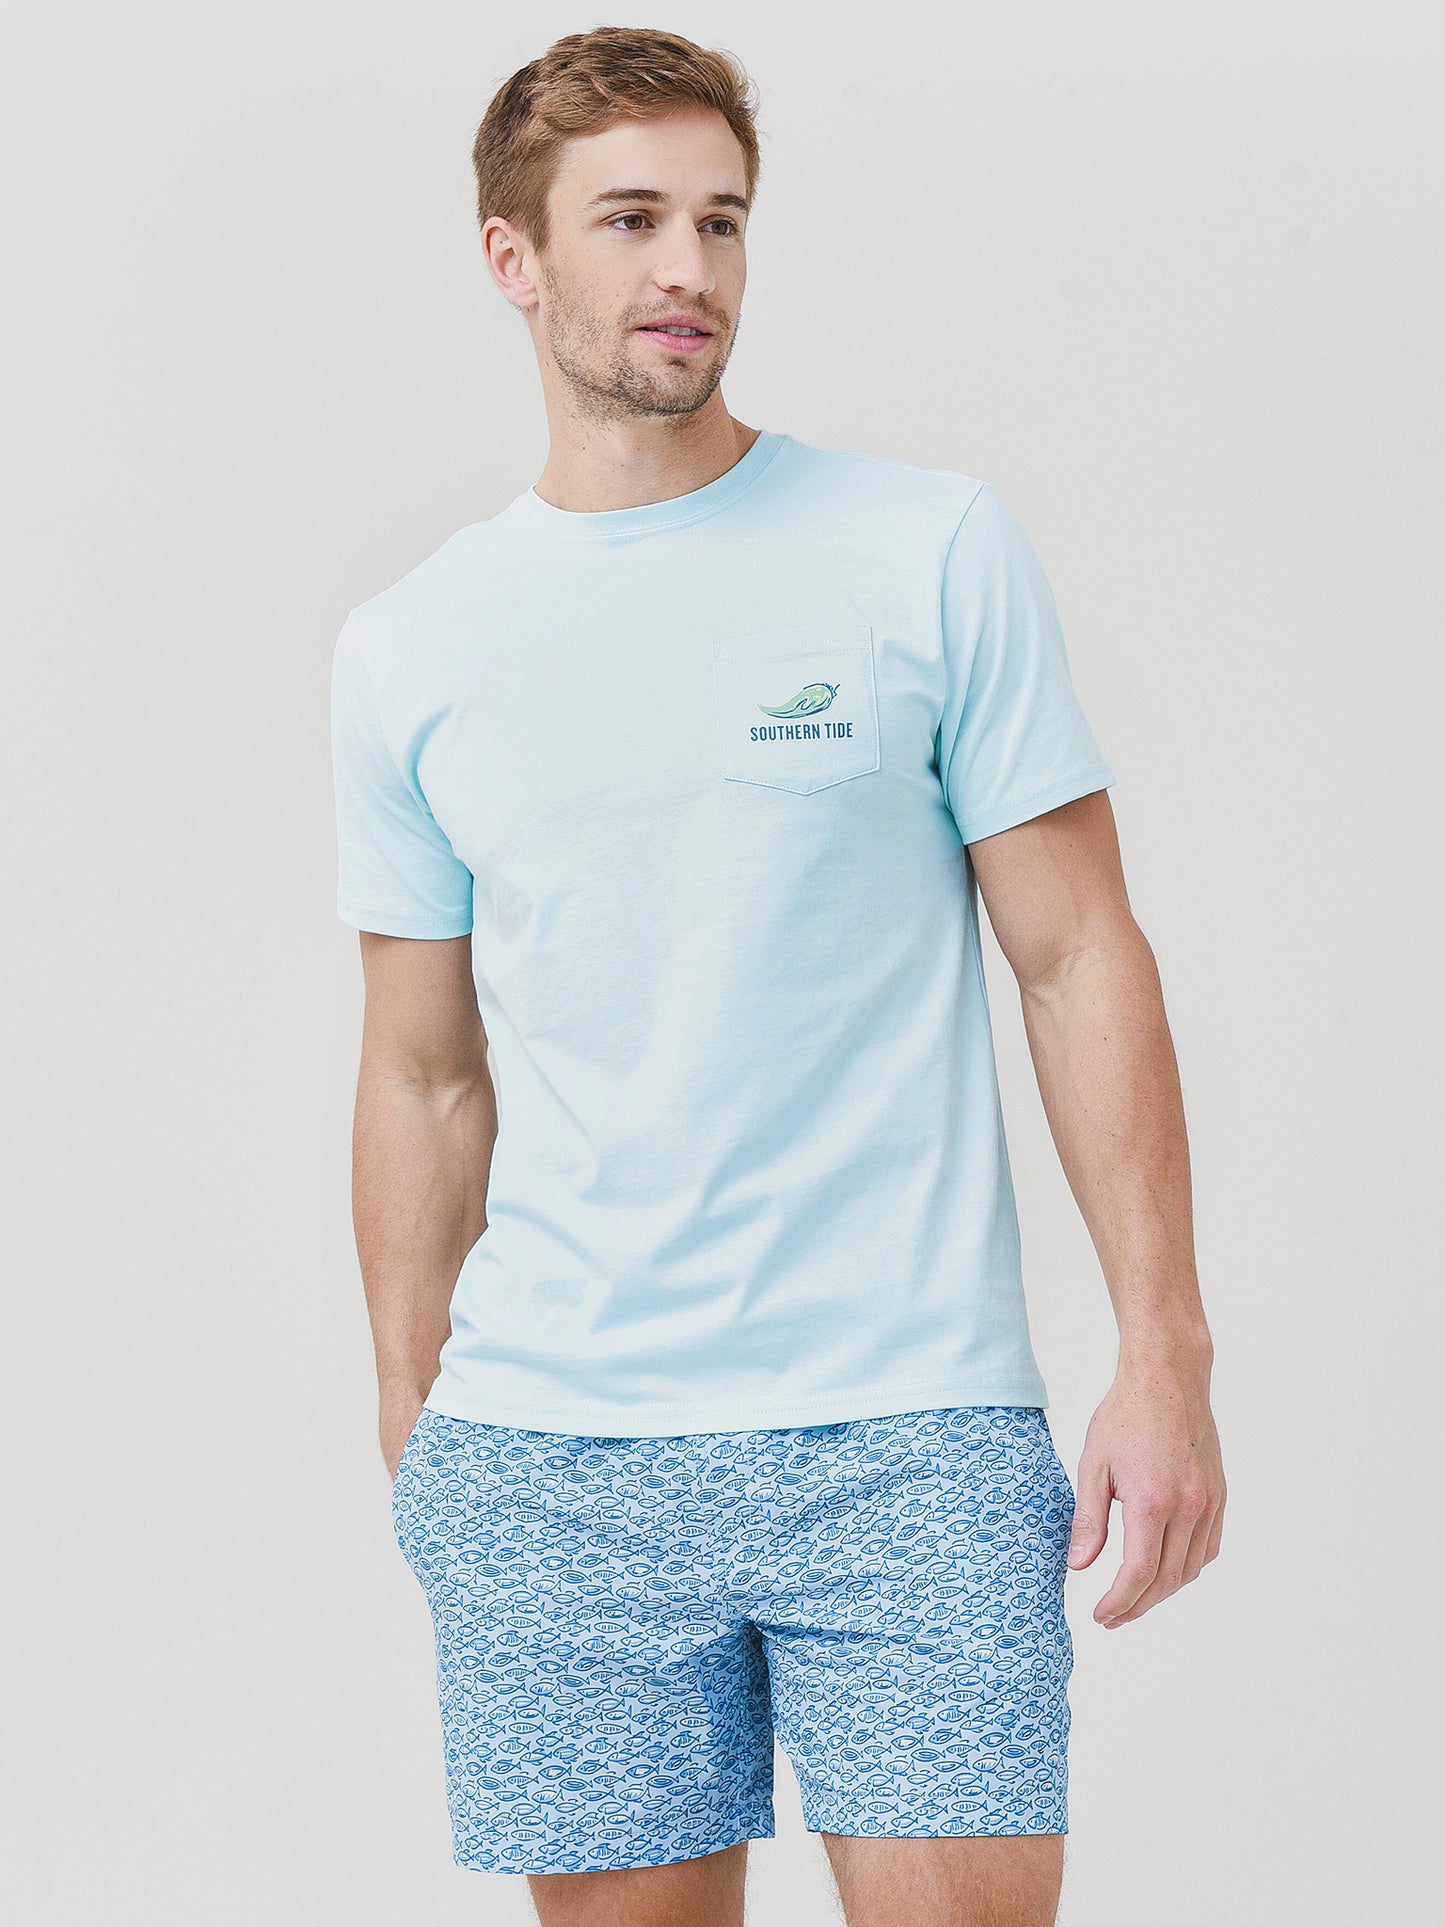 Southern Tide Men's Wing Contest Tee